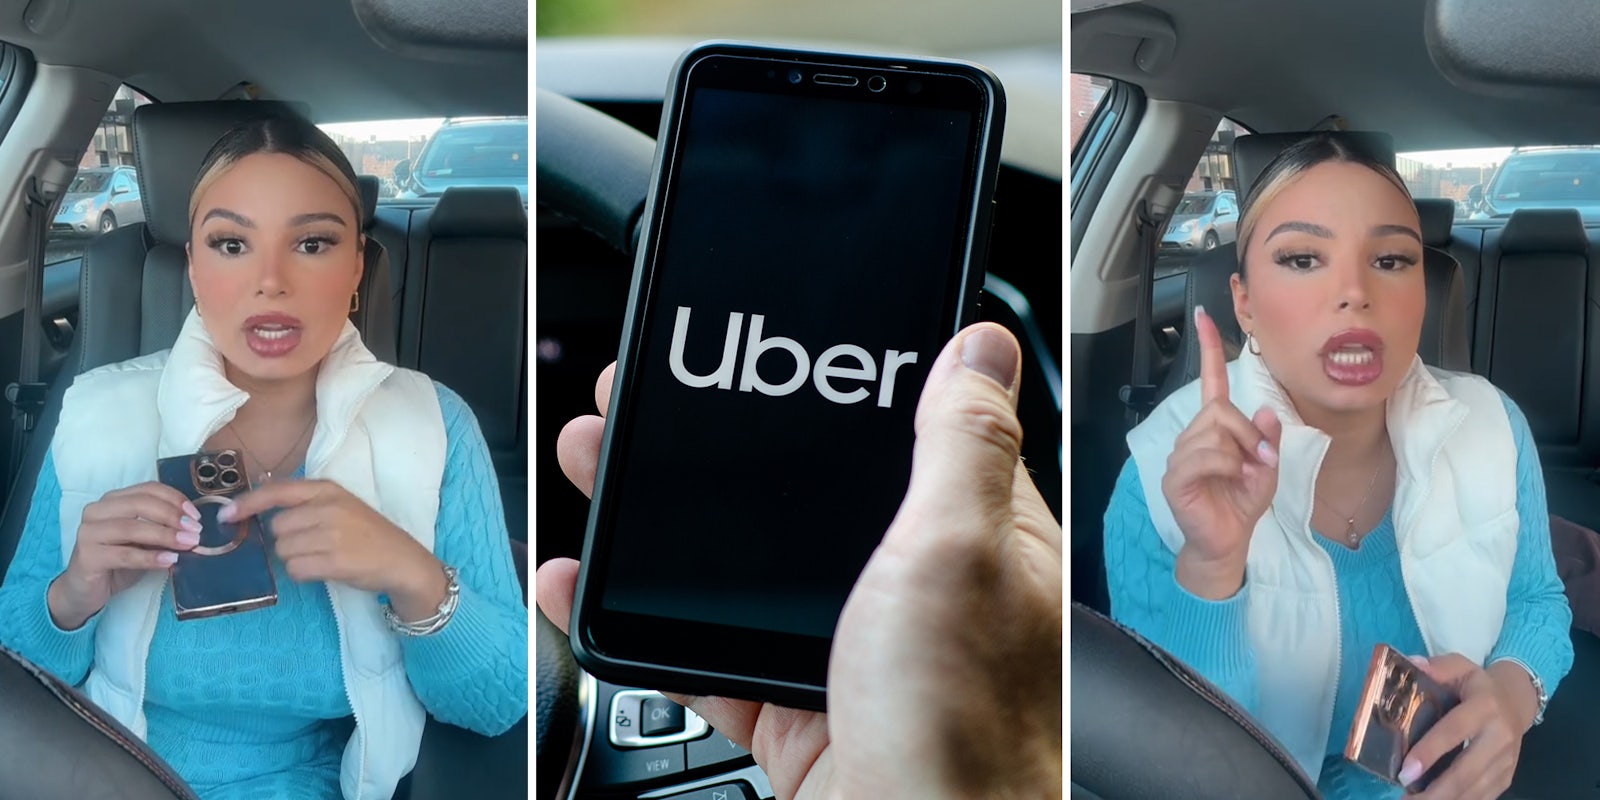 Woman says Uber driver tried to charge her $150 to get her phone back after she left it in car, then gave it back to her disabled for 1 hour